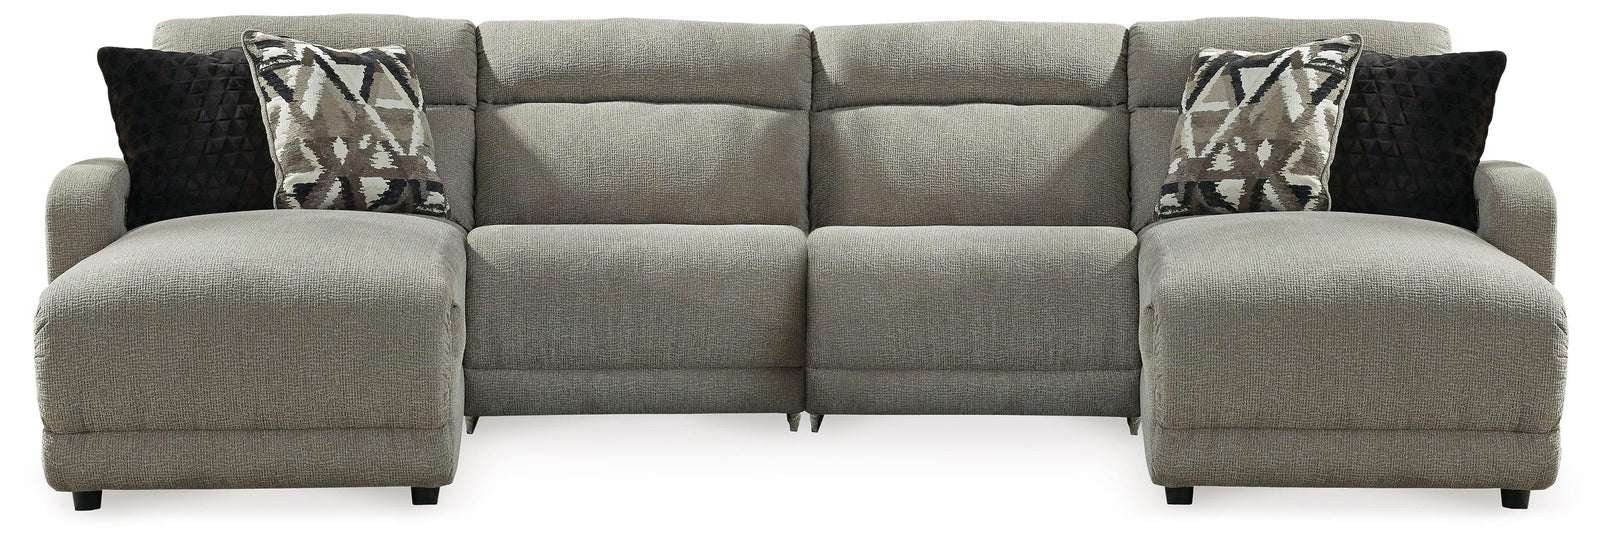 Colleyville Stone 4-Piece Power Reclining Sectional With Chaise 54405S16 - Ella Furniture